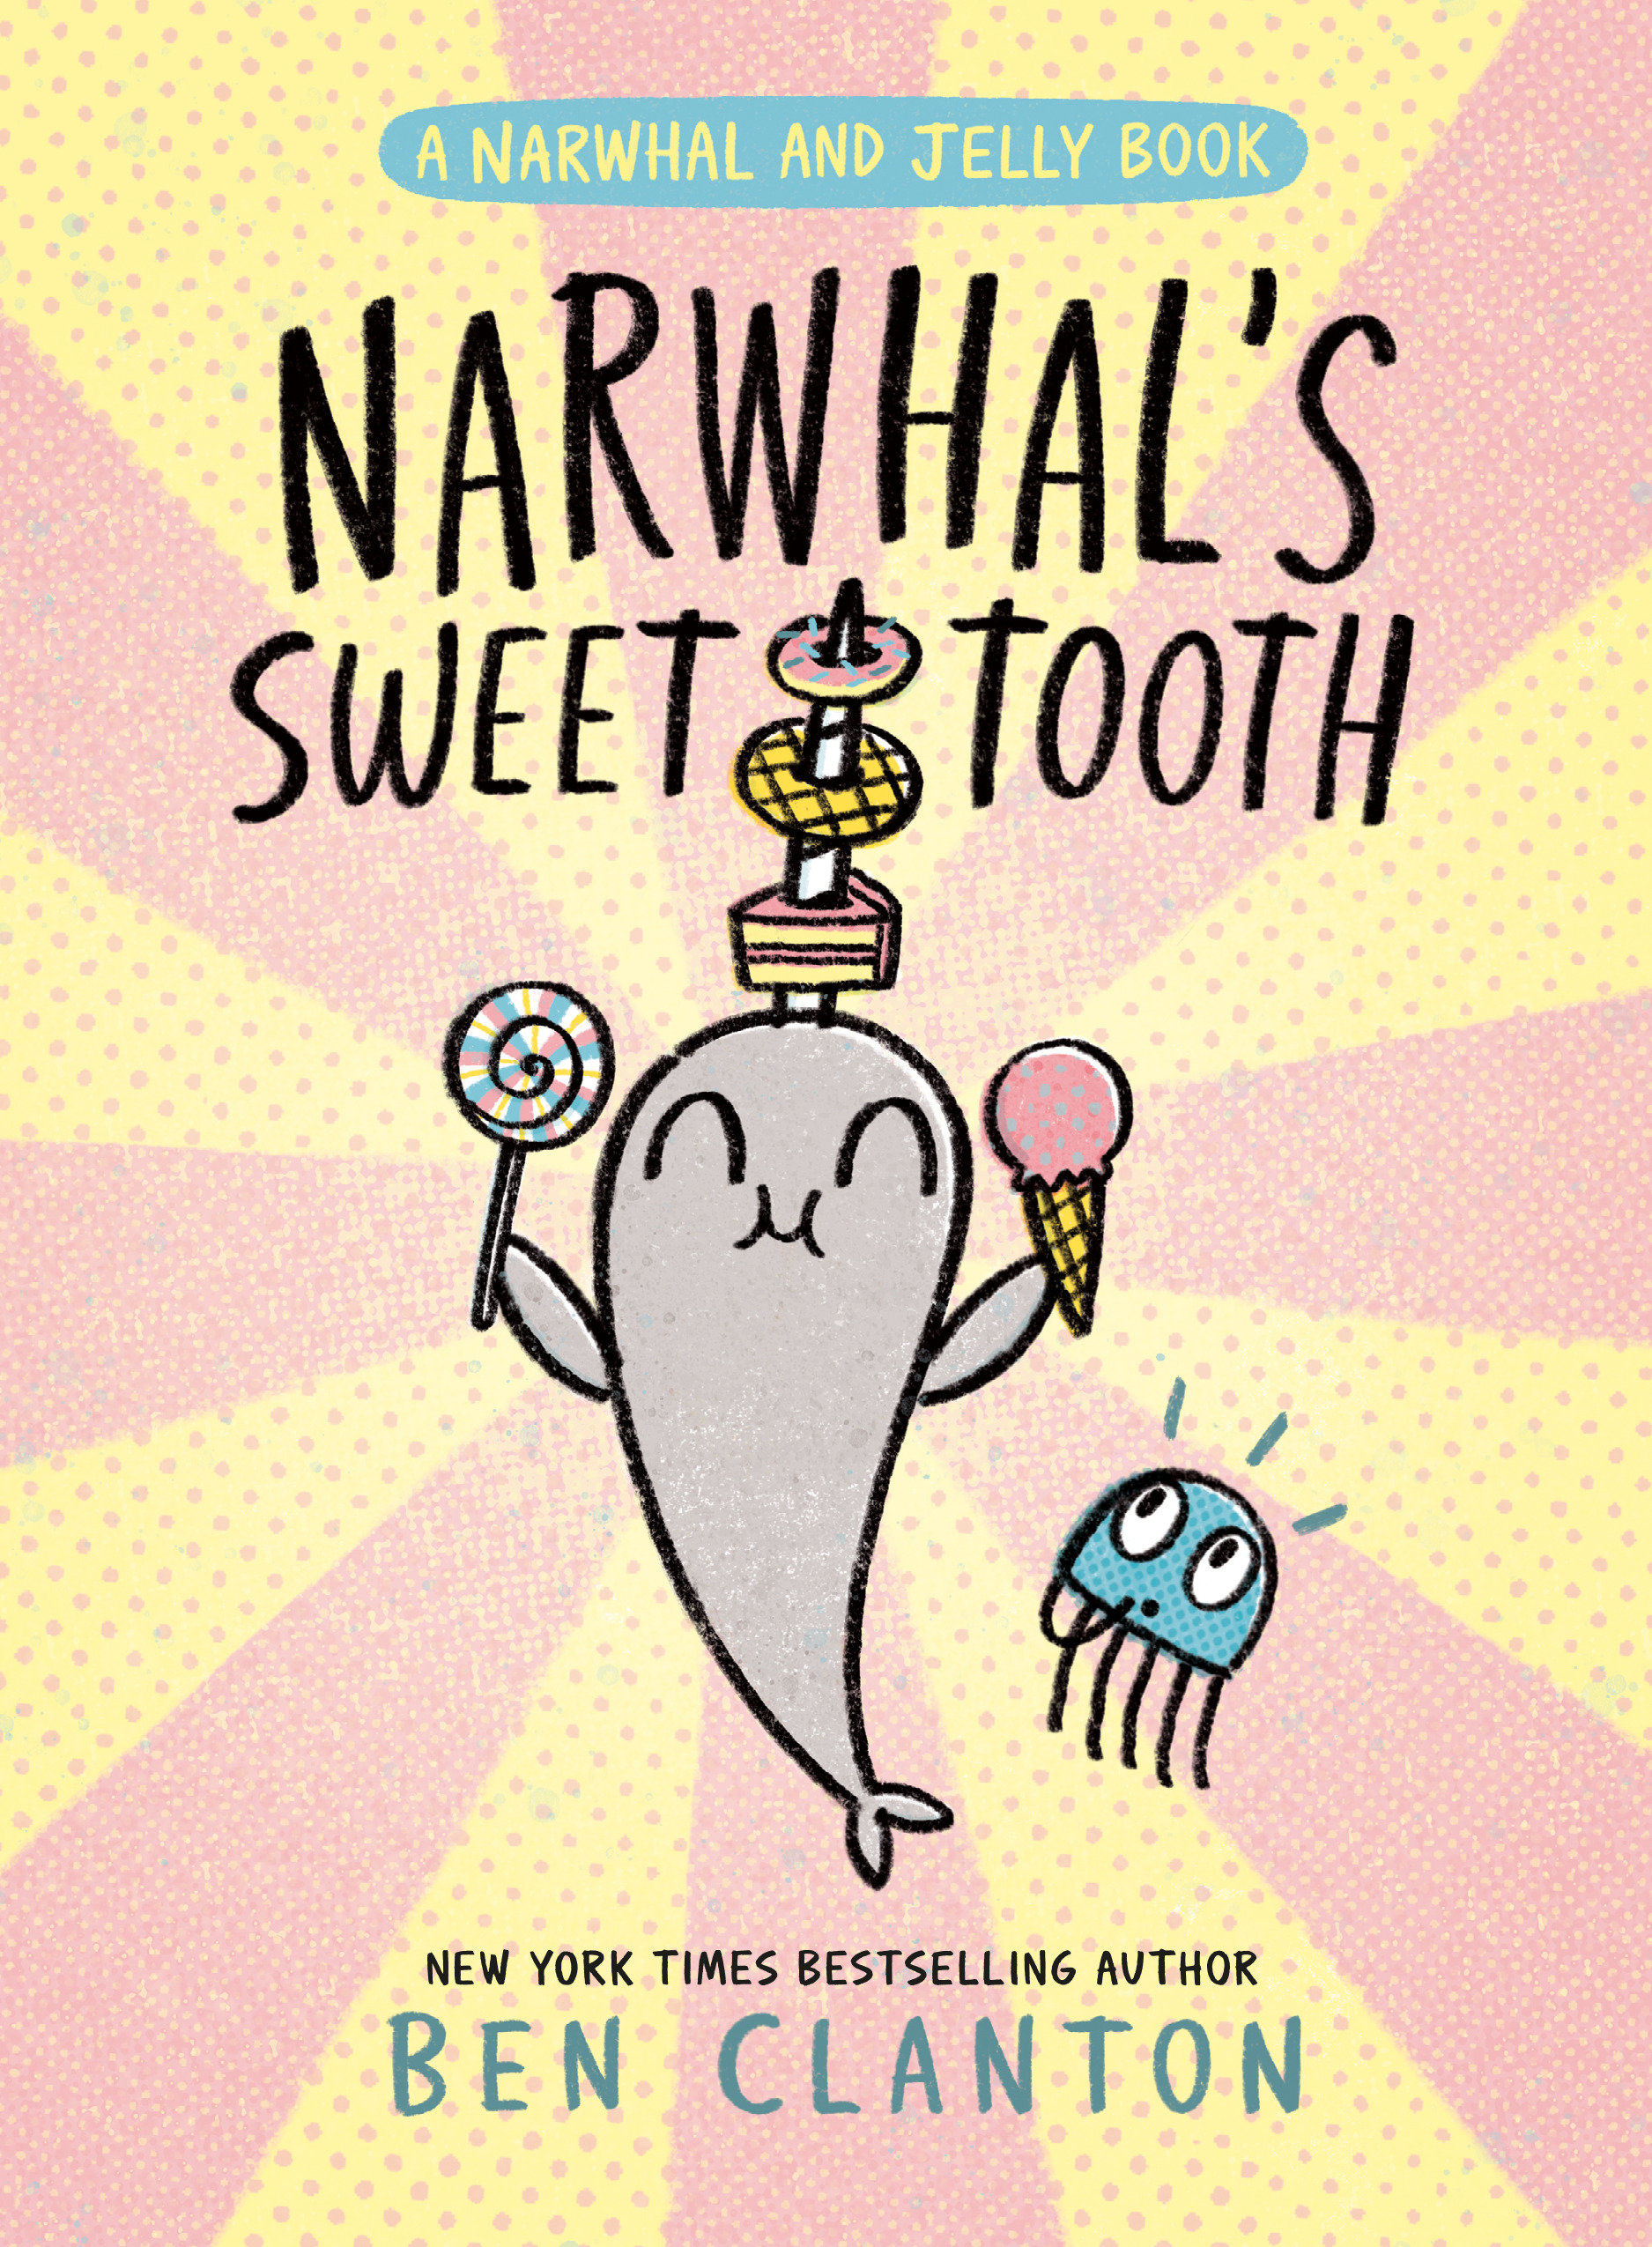 Narwhal & Jelly Hardcover Graphic Novel Volume 9 Narwhal's Sweet Tooth